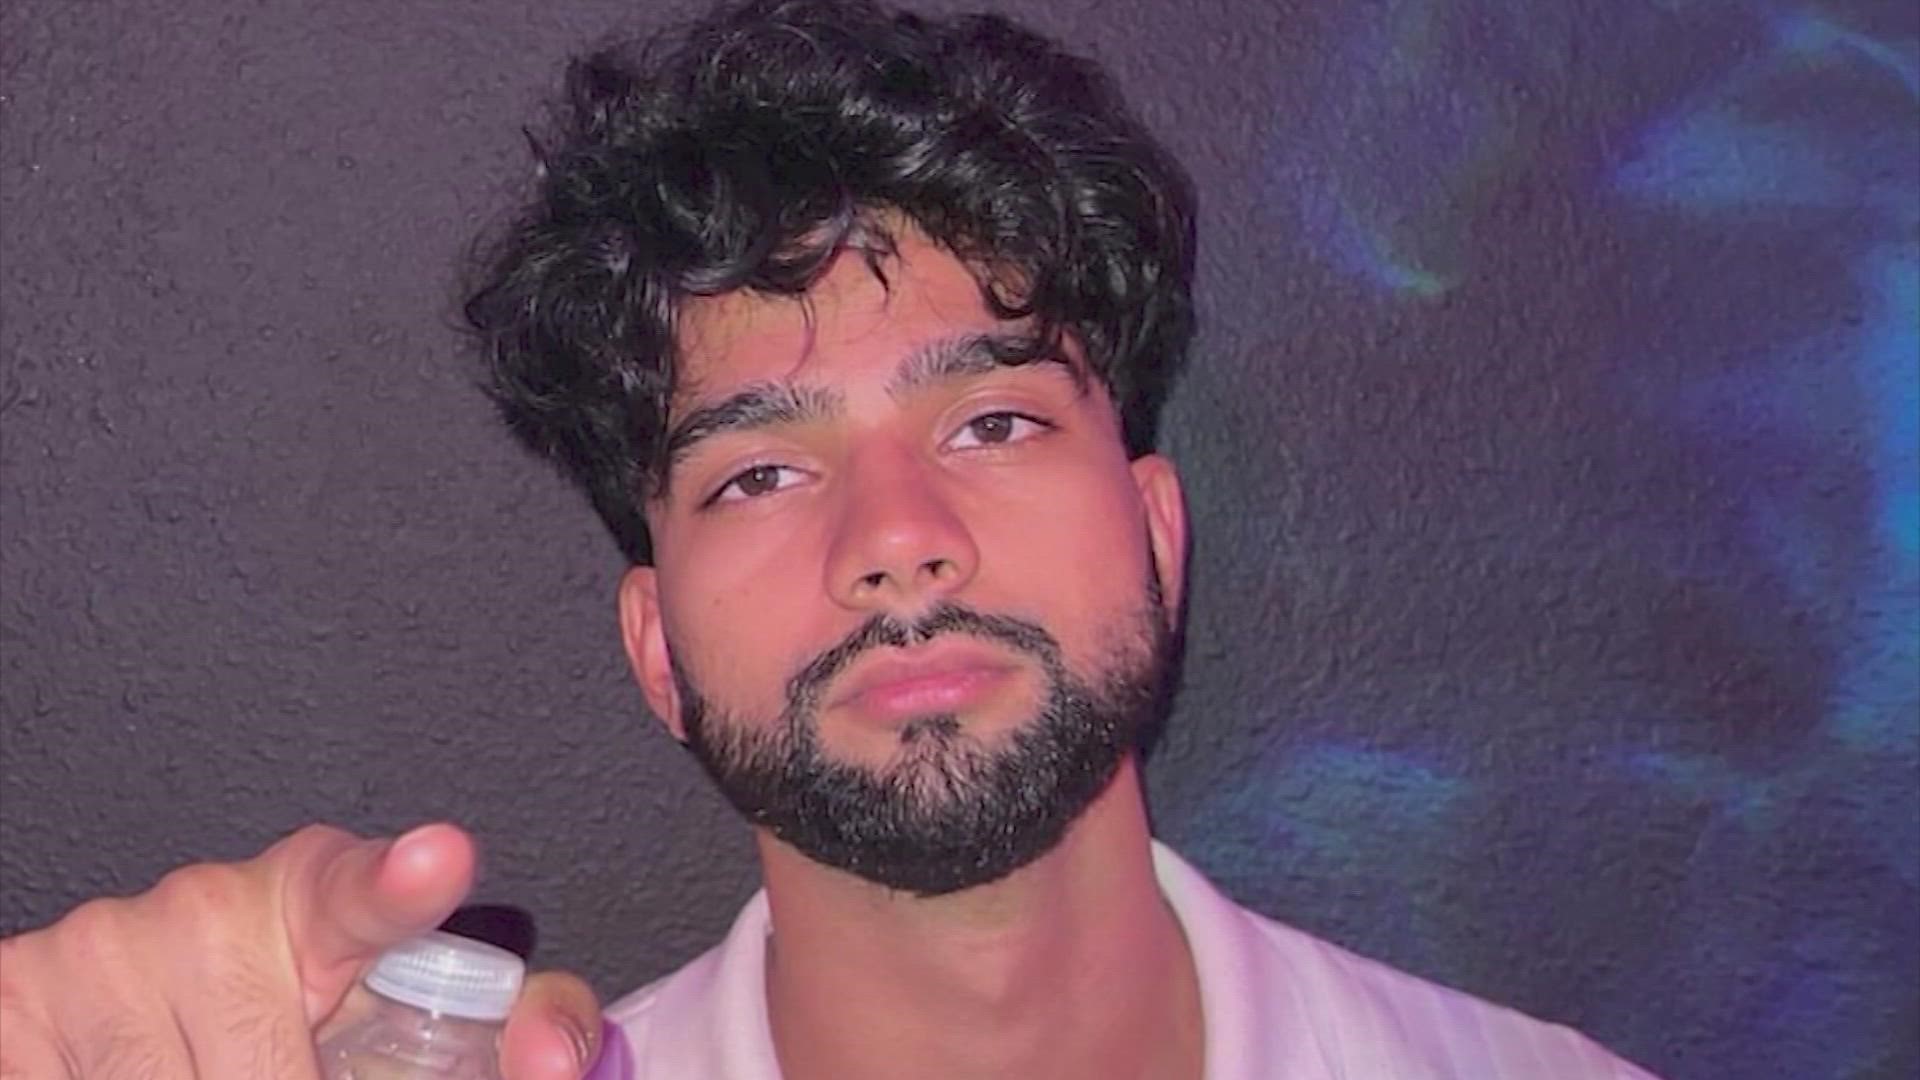 The sheriff's office said a dive team found Aamir Ali's body in Canyon Lake near Potters Creek Park around 2 p.m. on Wednesday.